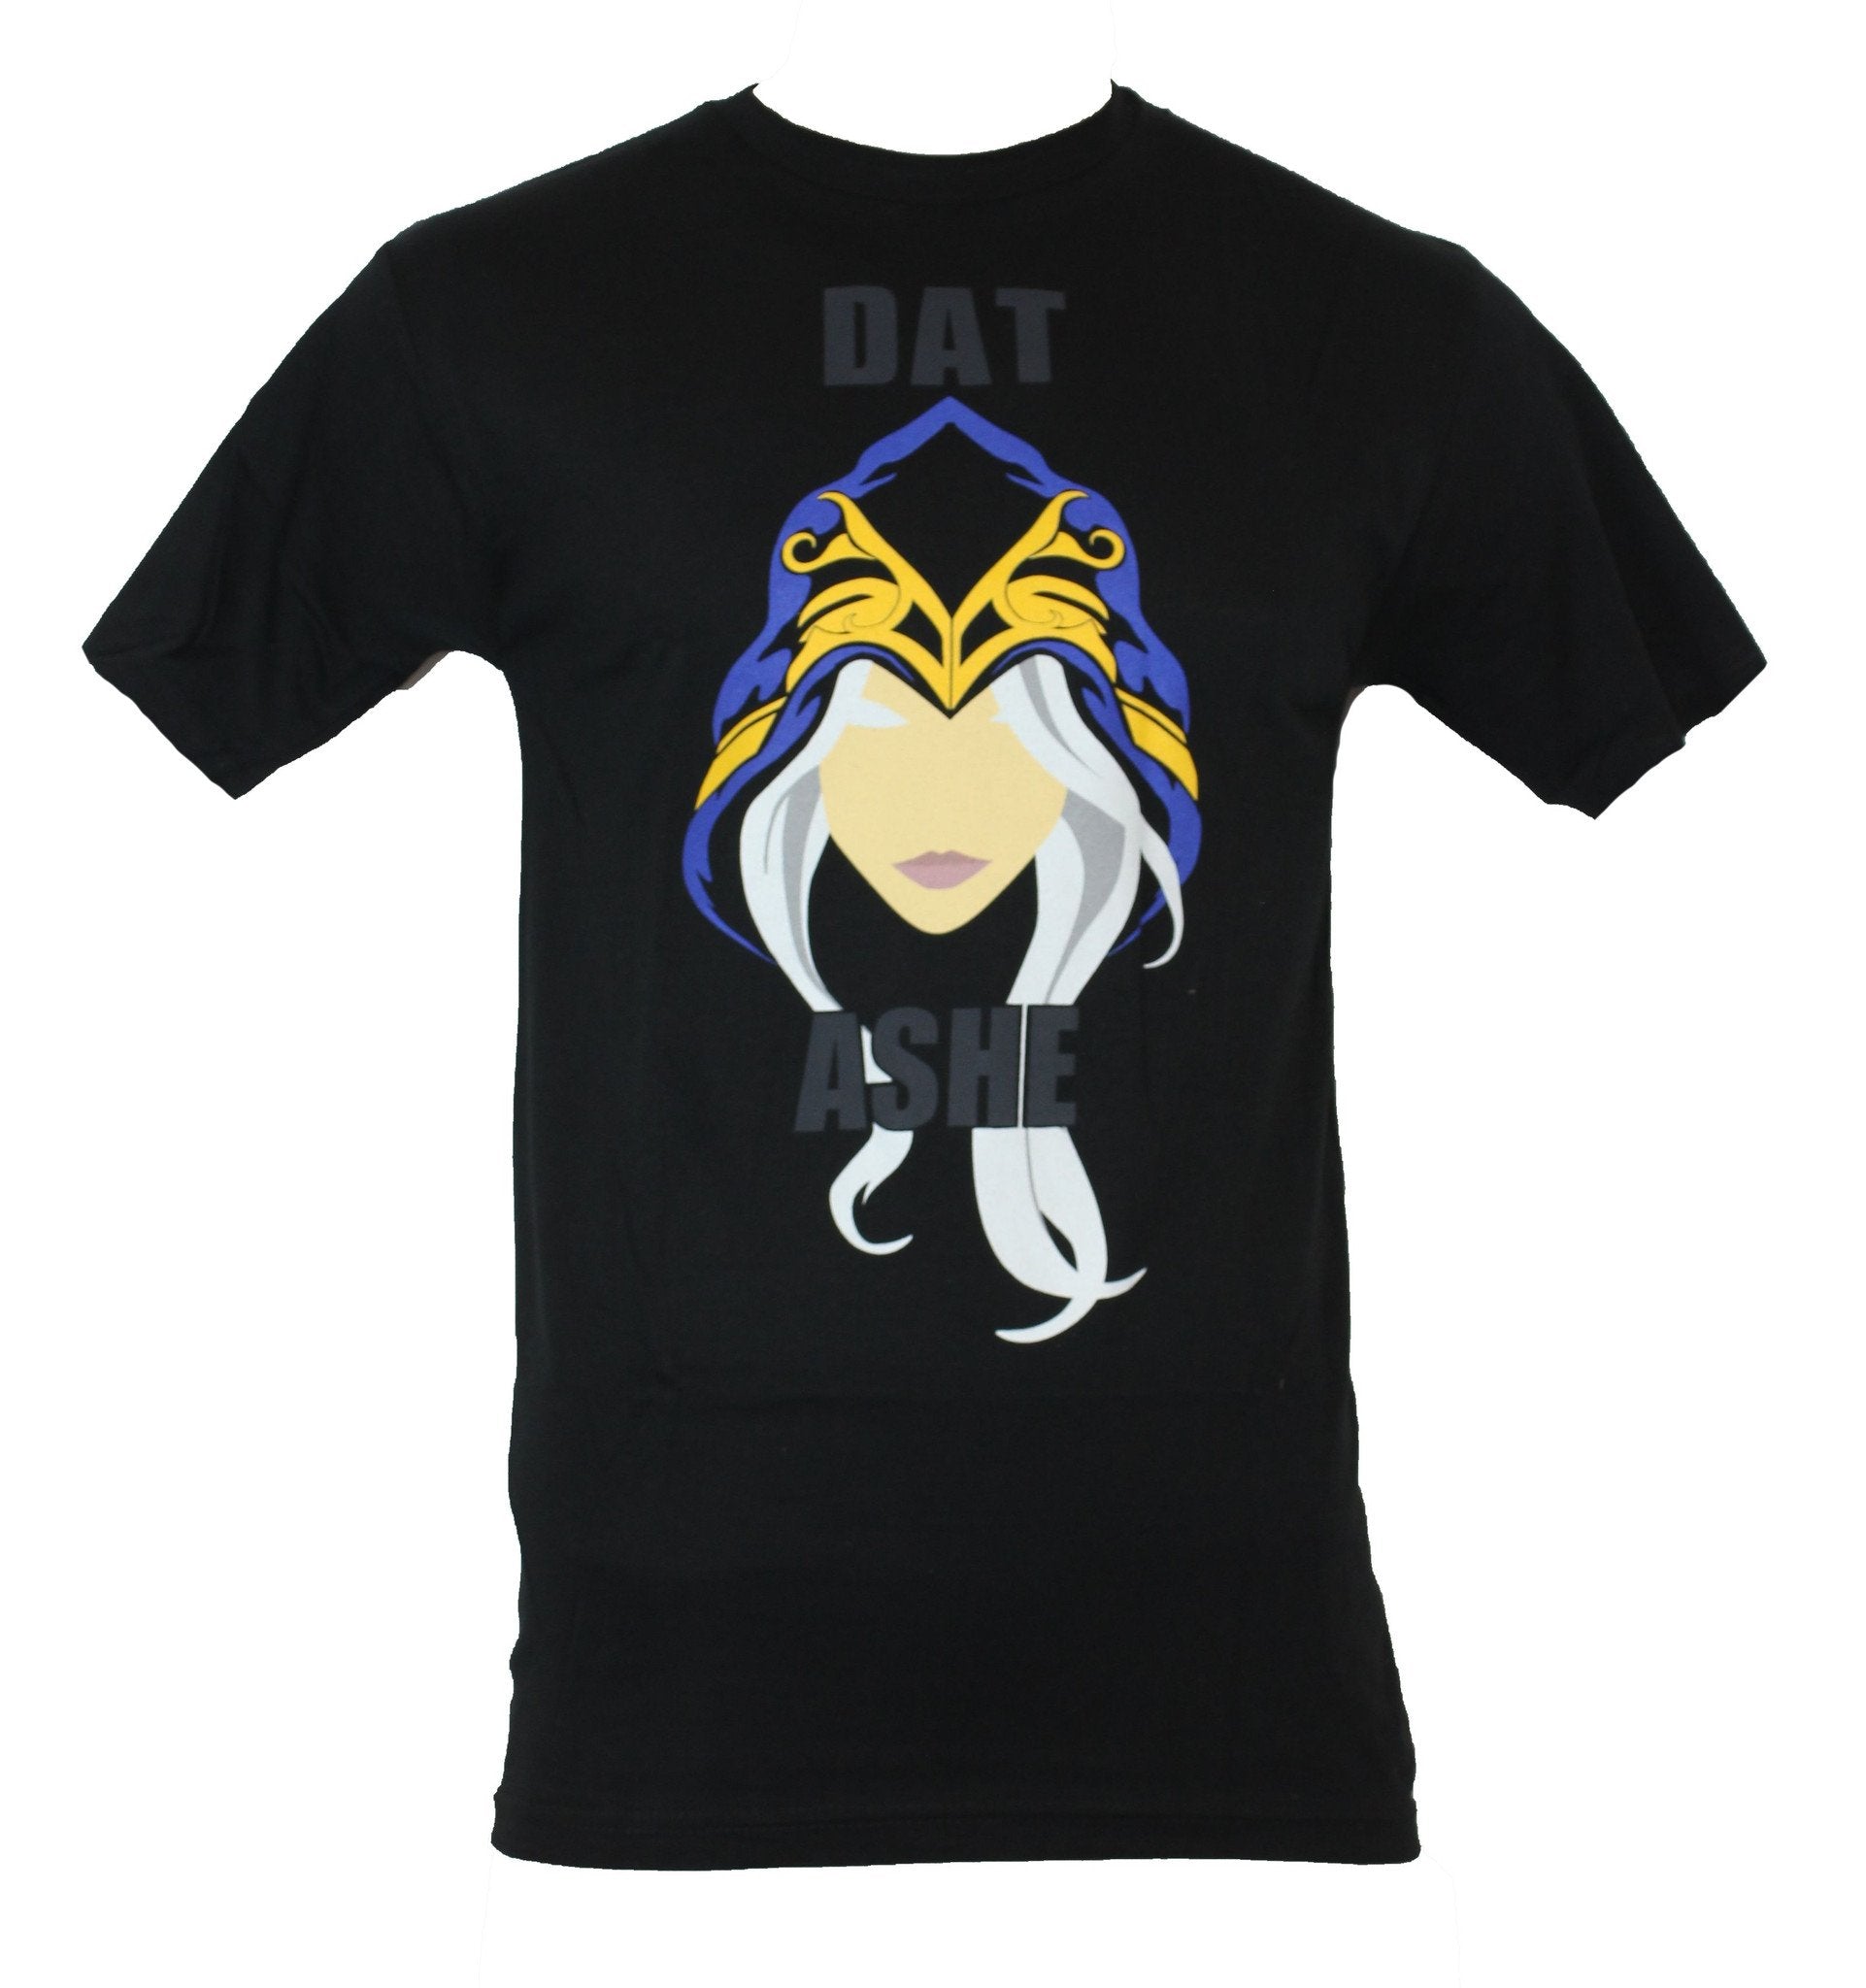 League of Legends Mens T-Shirt - "Dat Ashe" Image of the Forest Archer